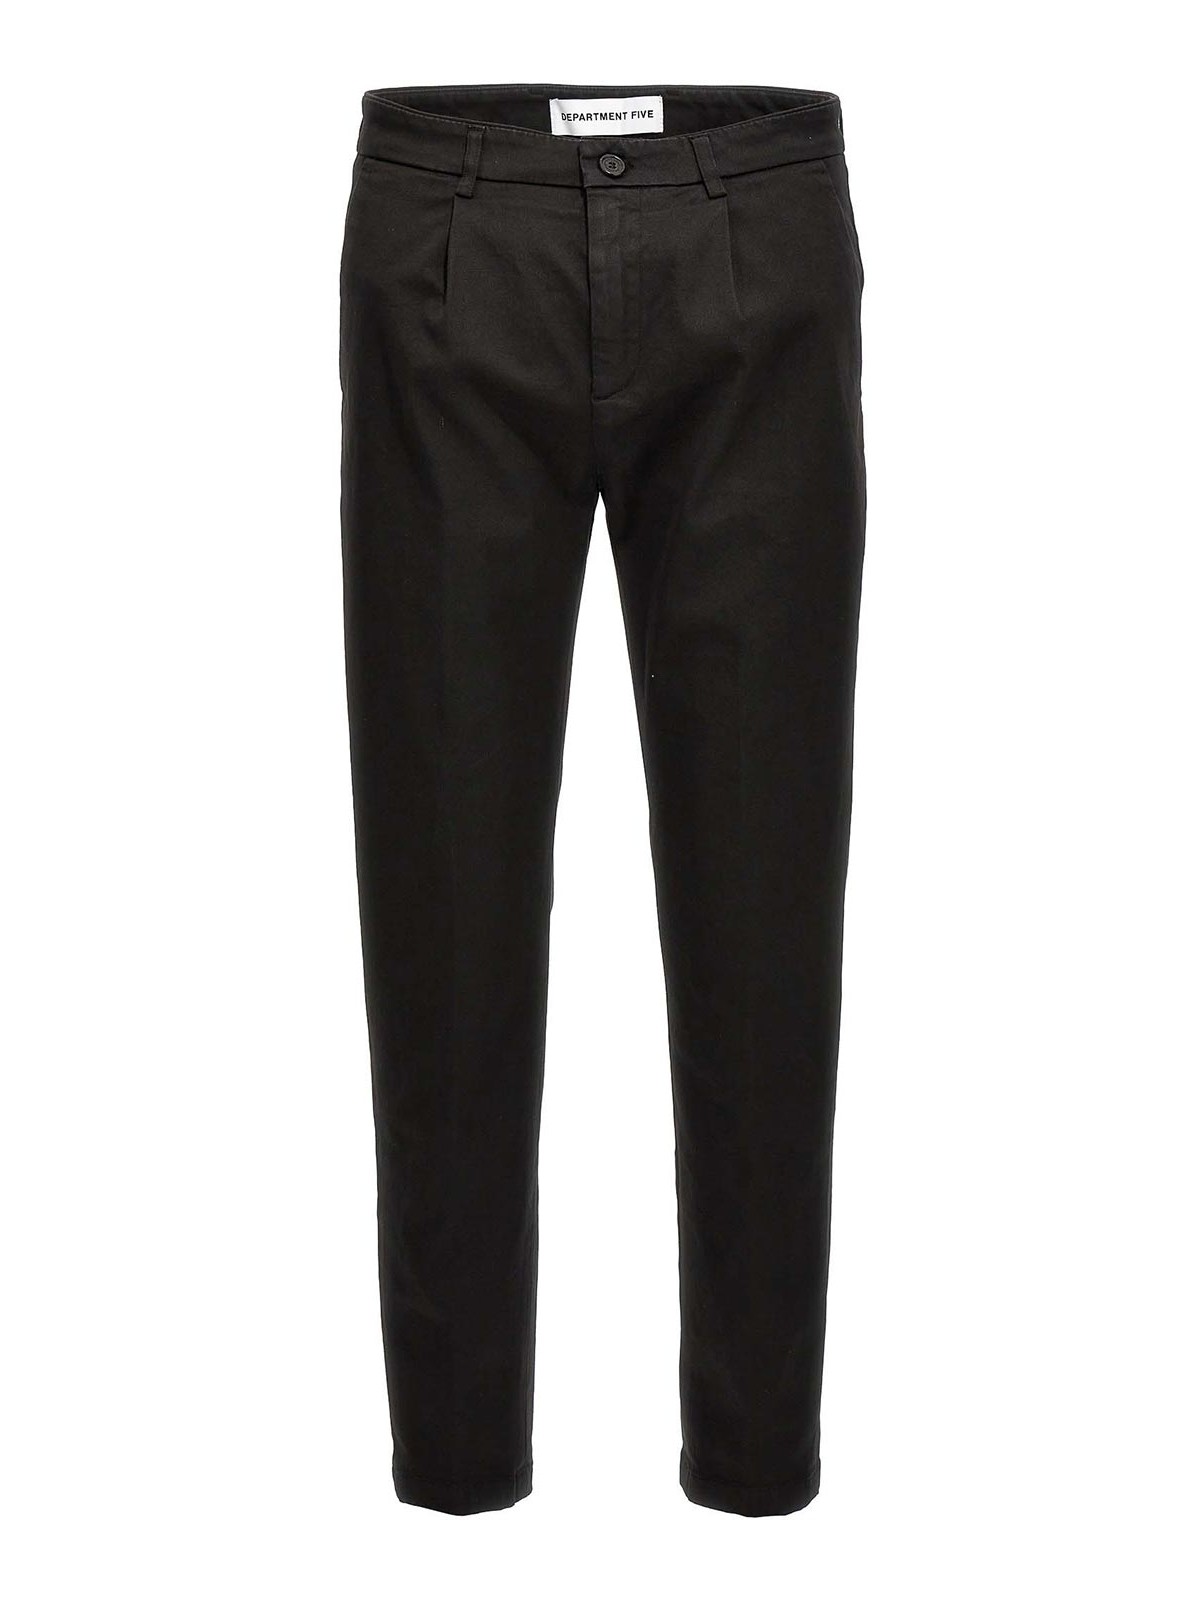 Department 5 Prince Trousers In Black